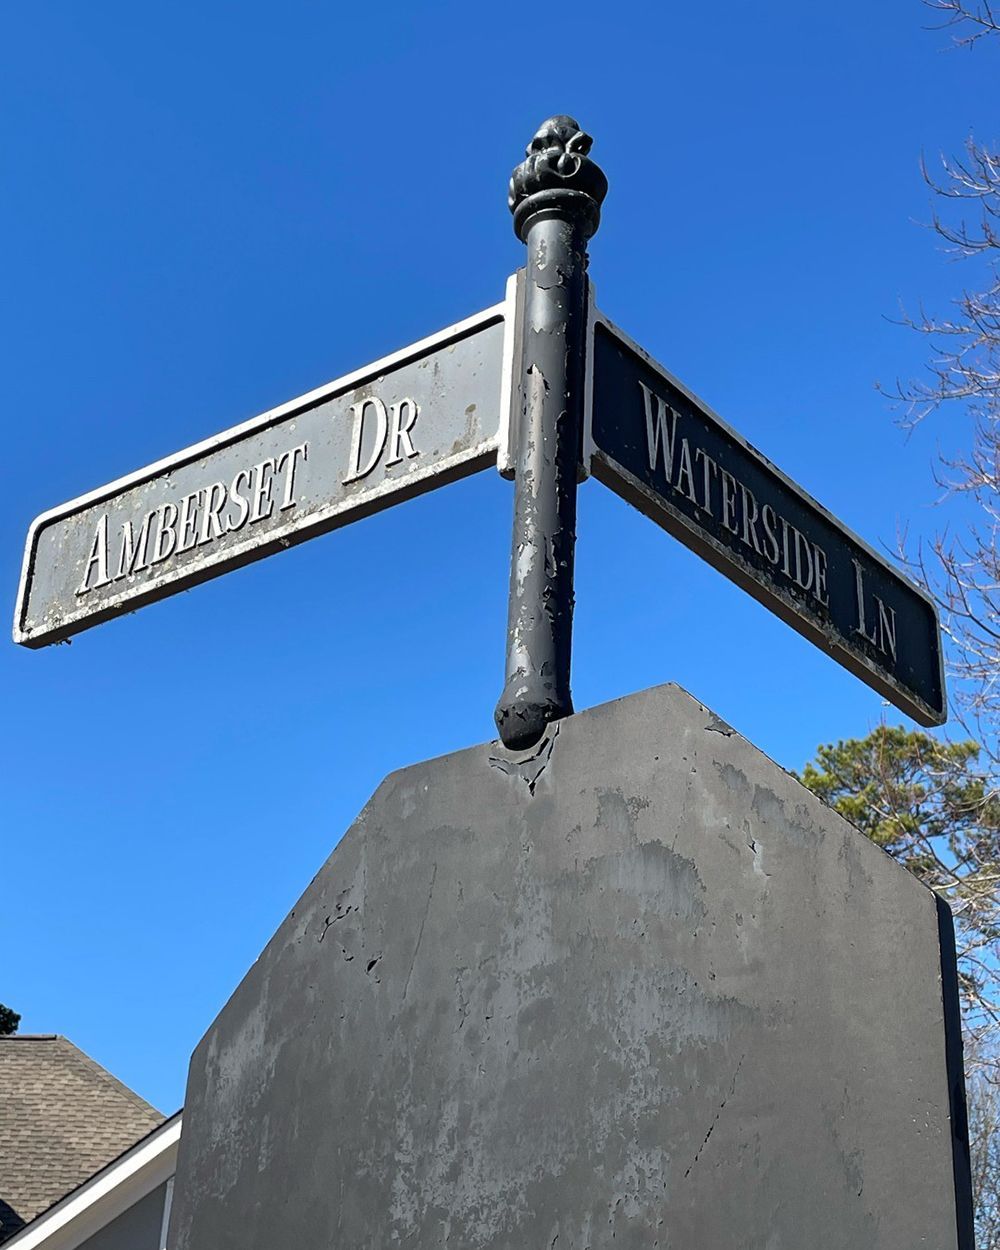 A street sign that says Waterside Ln on it